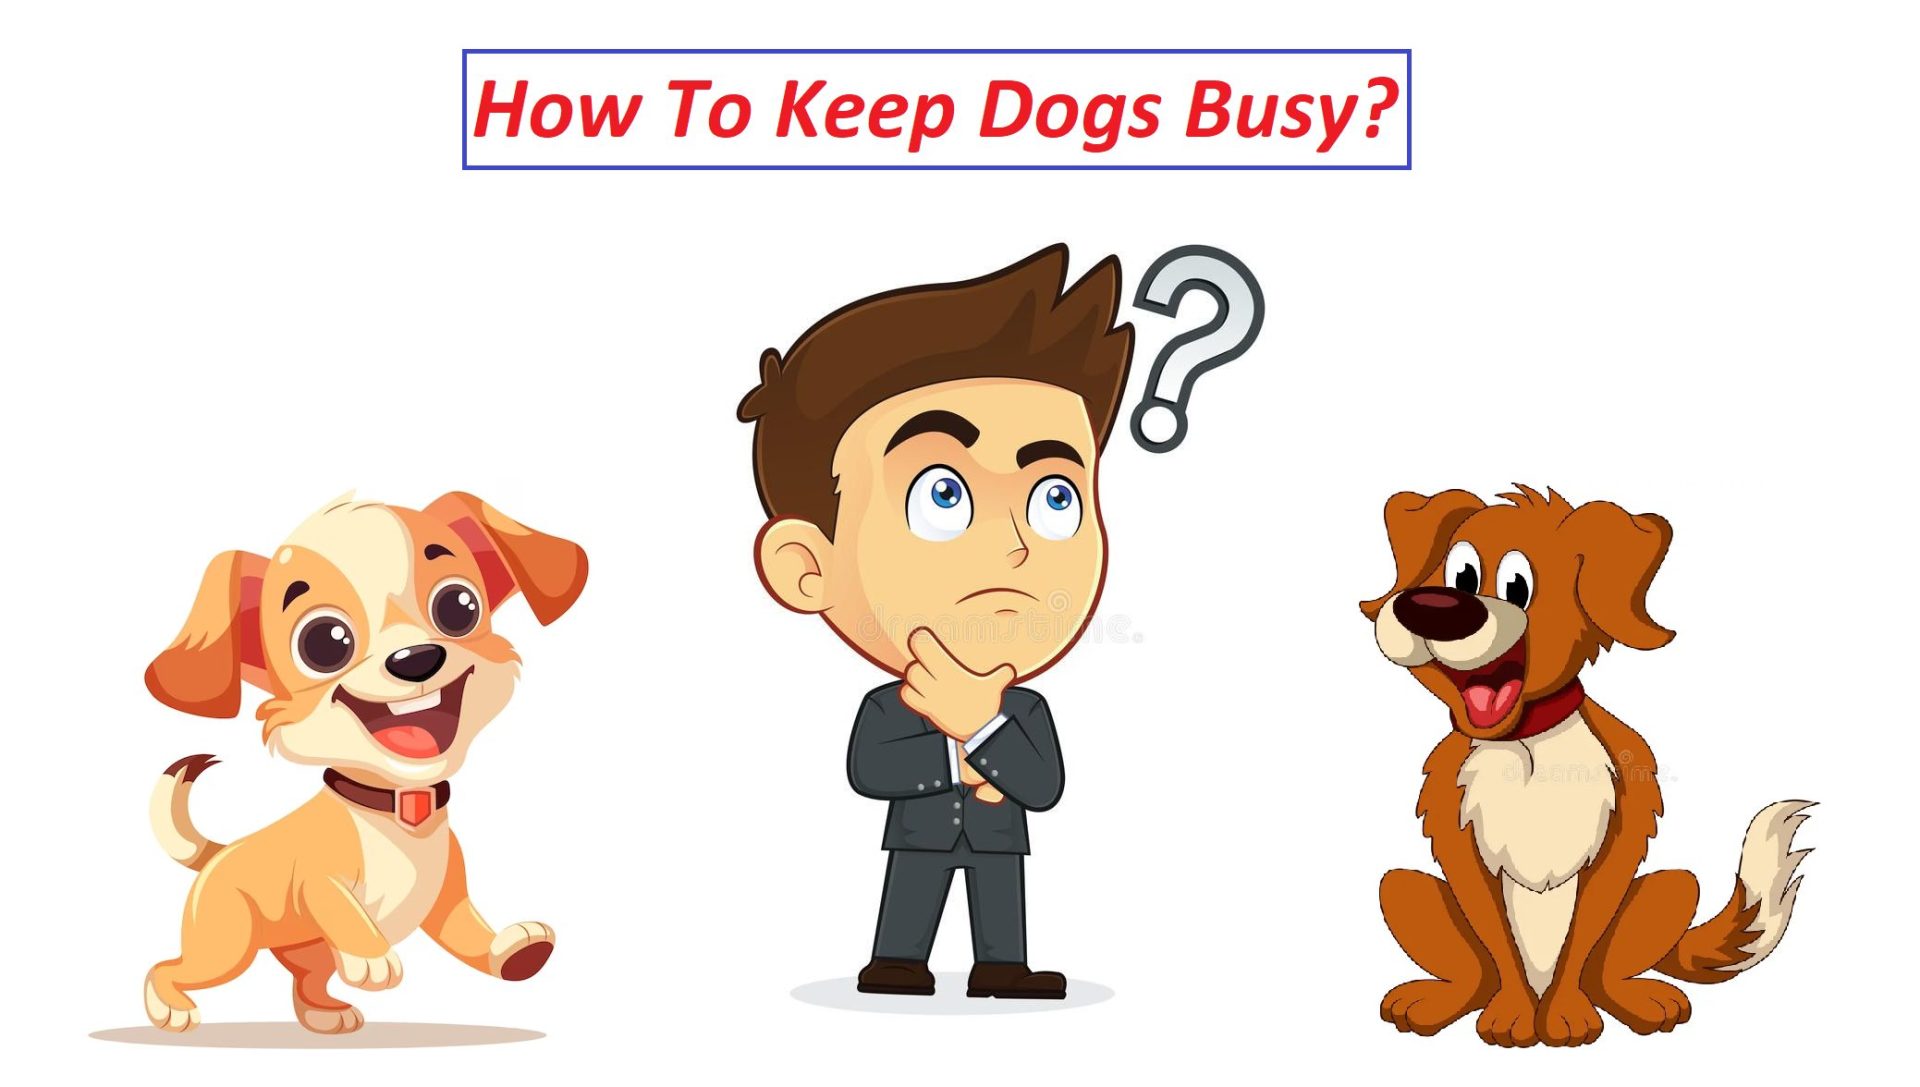 How To Keep Dogs Busy?